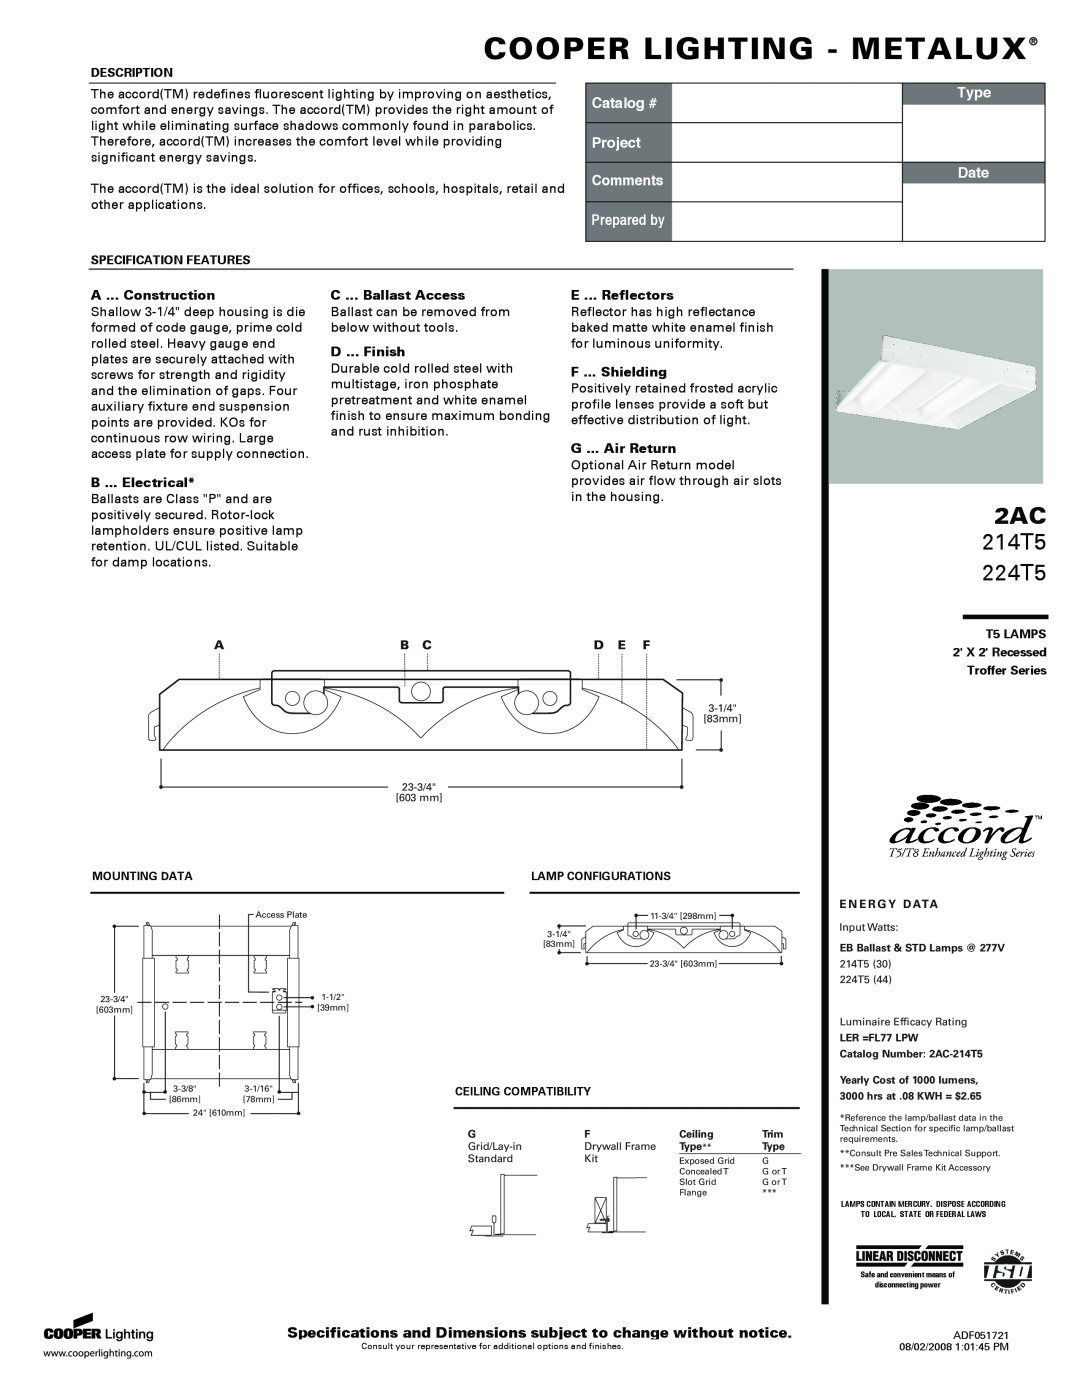 Cooper Lighting specifications Cooper Lighting - Metalux, 214T5 224T5, Catalog #, Project Comments, Prepared by, Type 